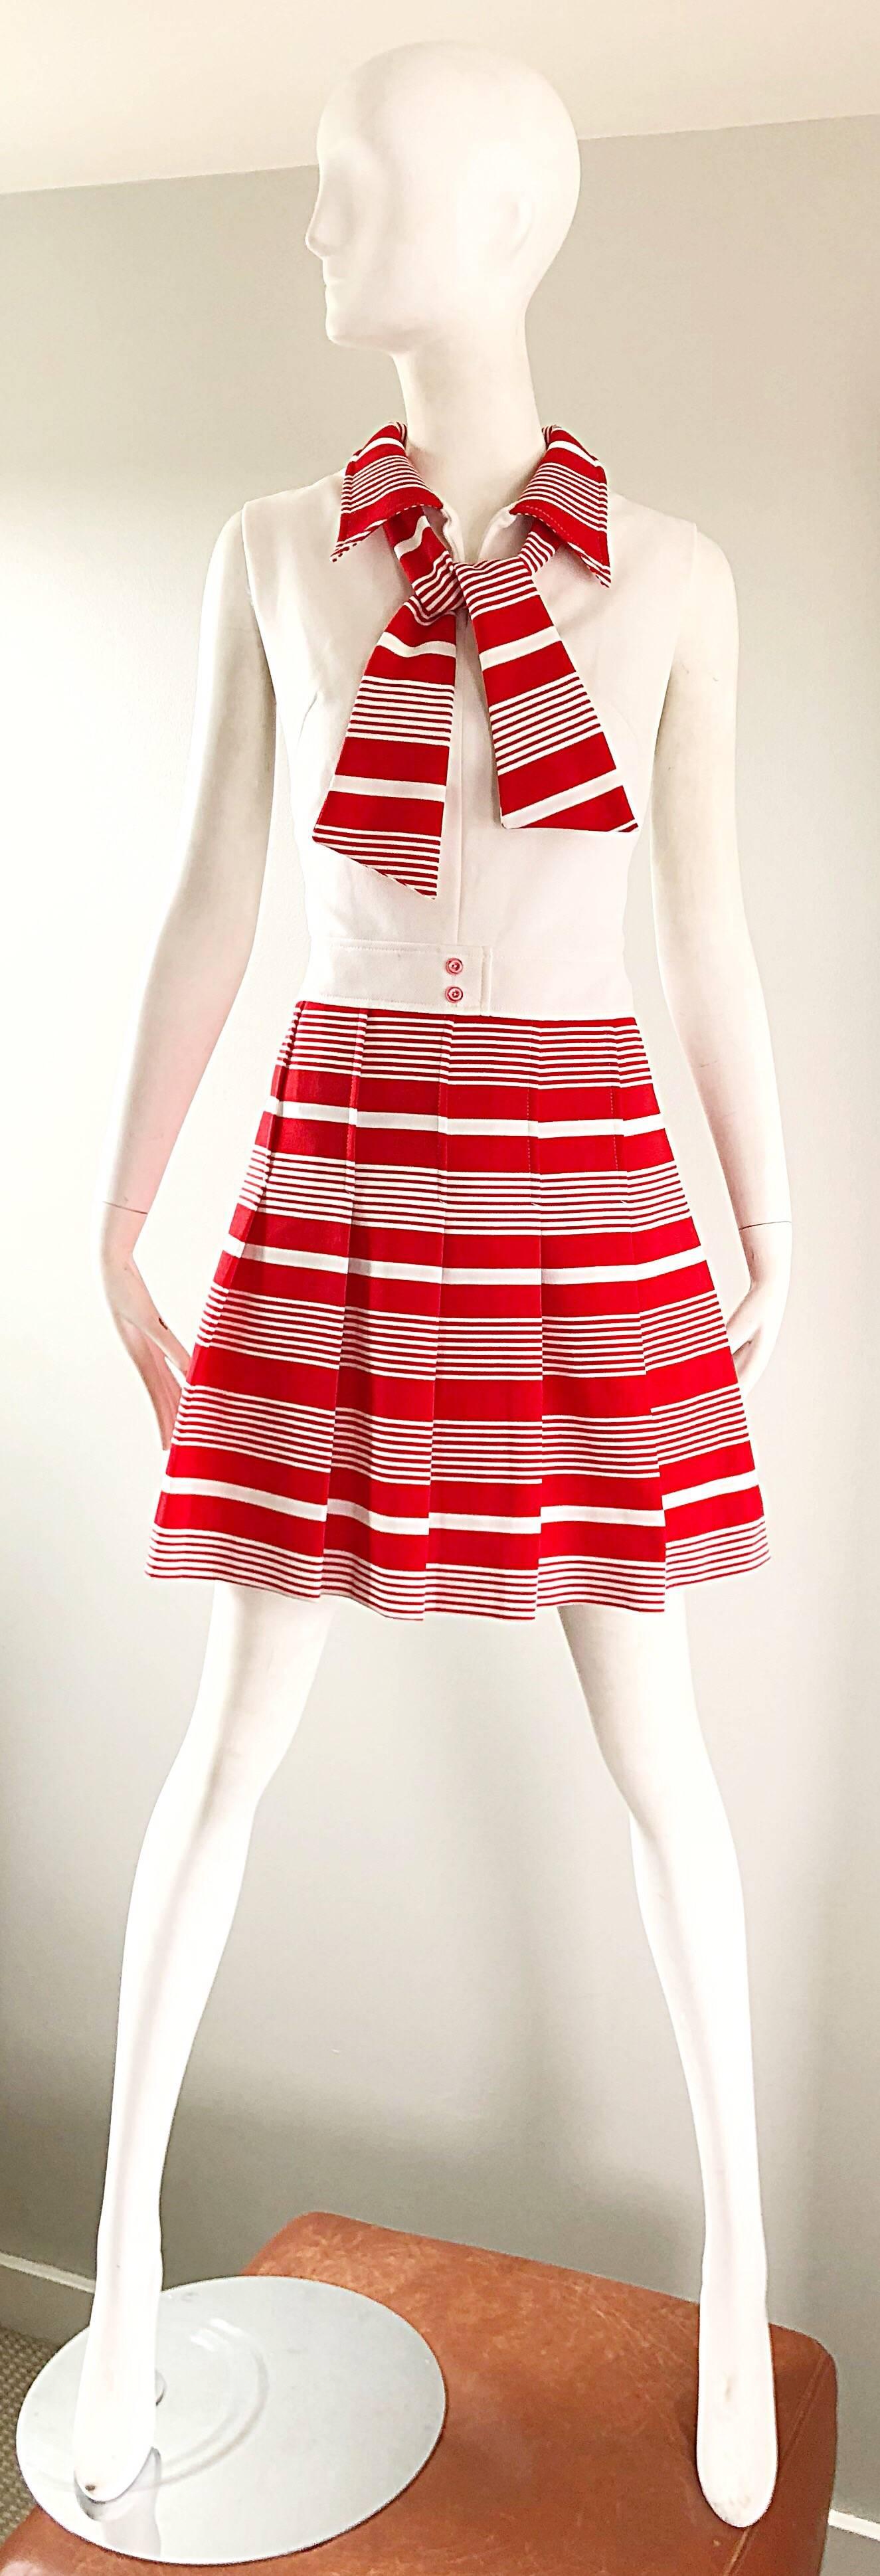 Chic 60s Italian red and white striped knit A-Line scooter dress! Features a fitted white bodice with an attached sash scarf at the neck. Flattering pleated skirt. Soft knit fabric stretches to fit. Full metal zipper up the back with hook-and-eye